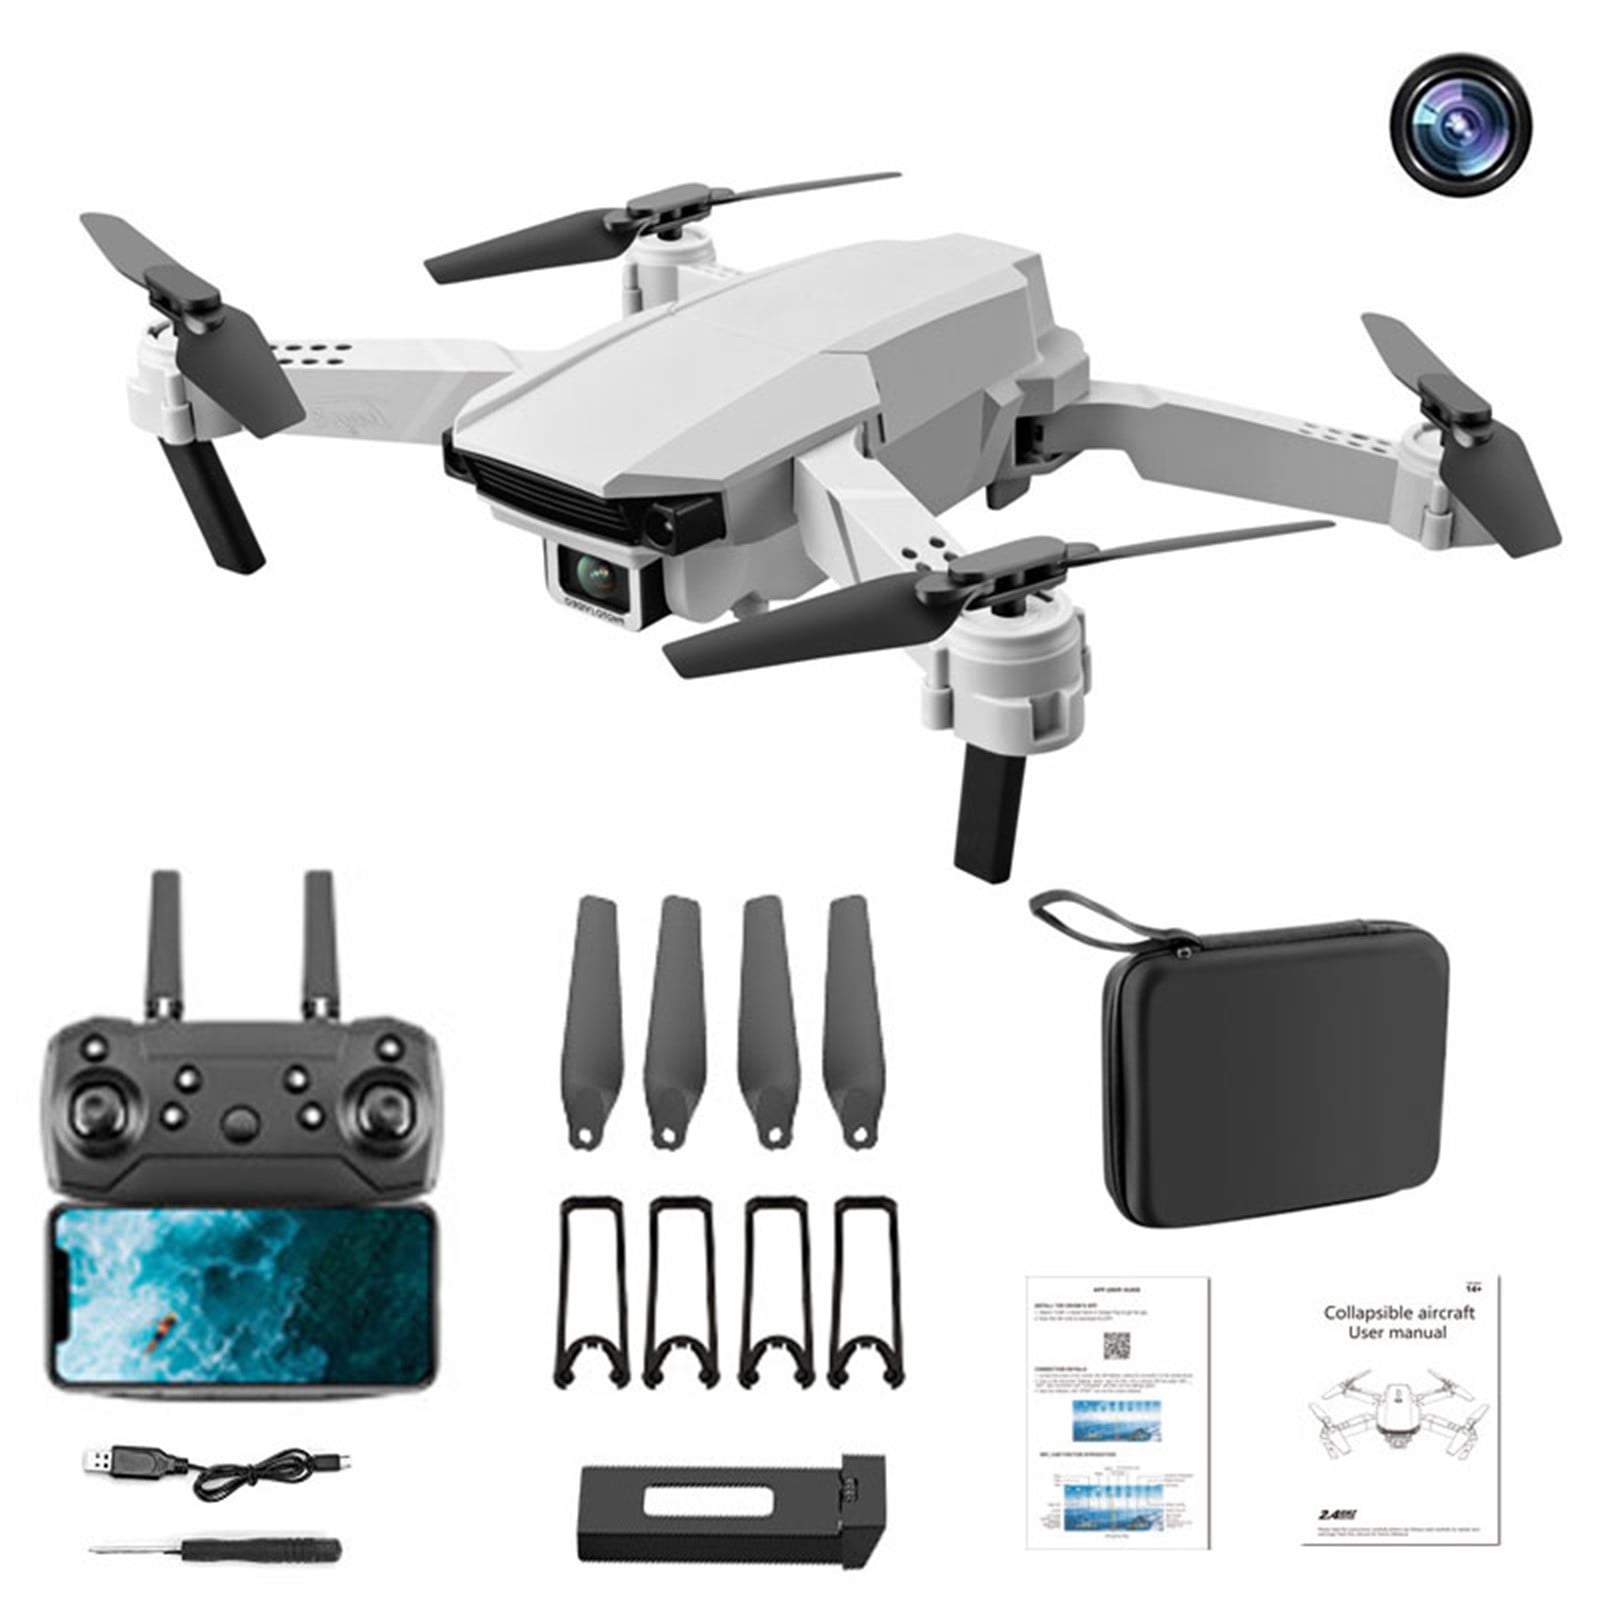 Yyeselk S62 4K Quadcopter Drone with HD FPV Camera Live Video for Adults,  Kids, Beginners, 4K Camera, Gesture Control, GPS Auto Return, Follow Me,  Storage Bags 